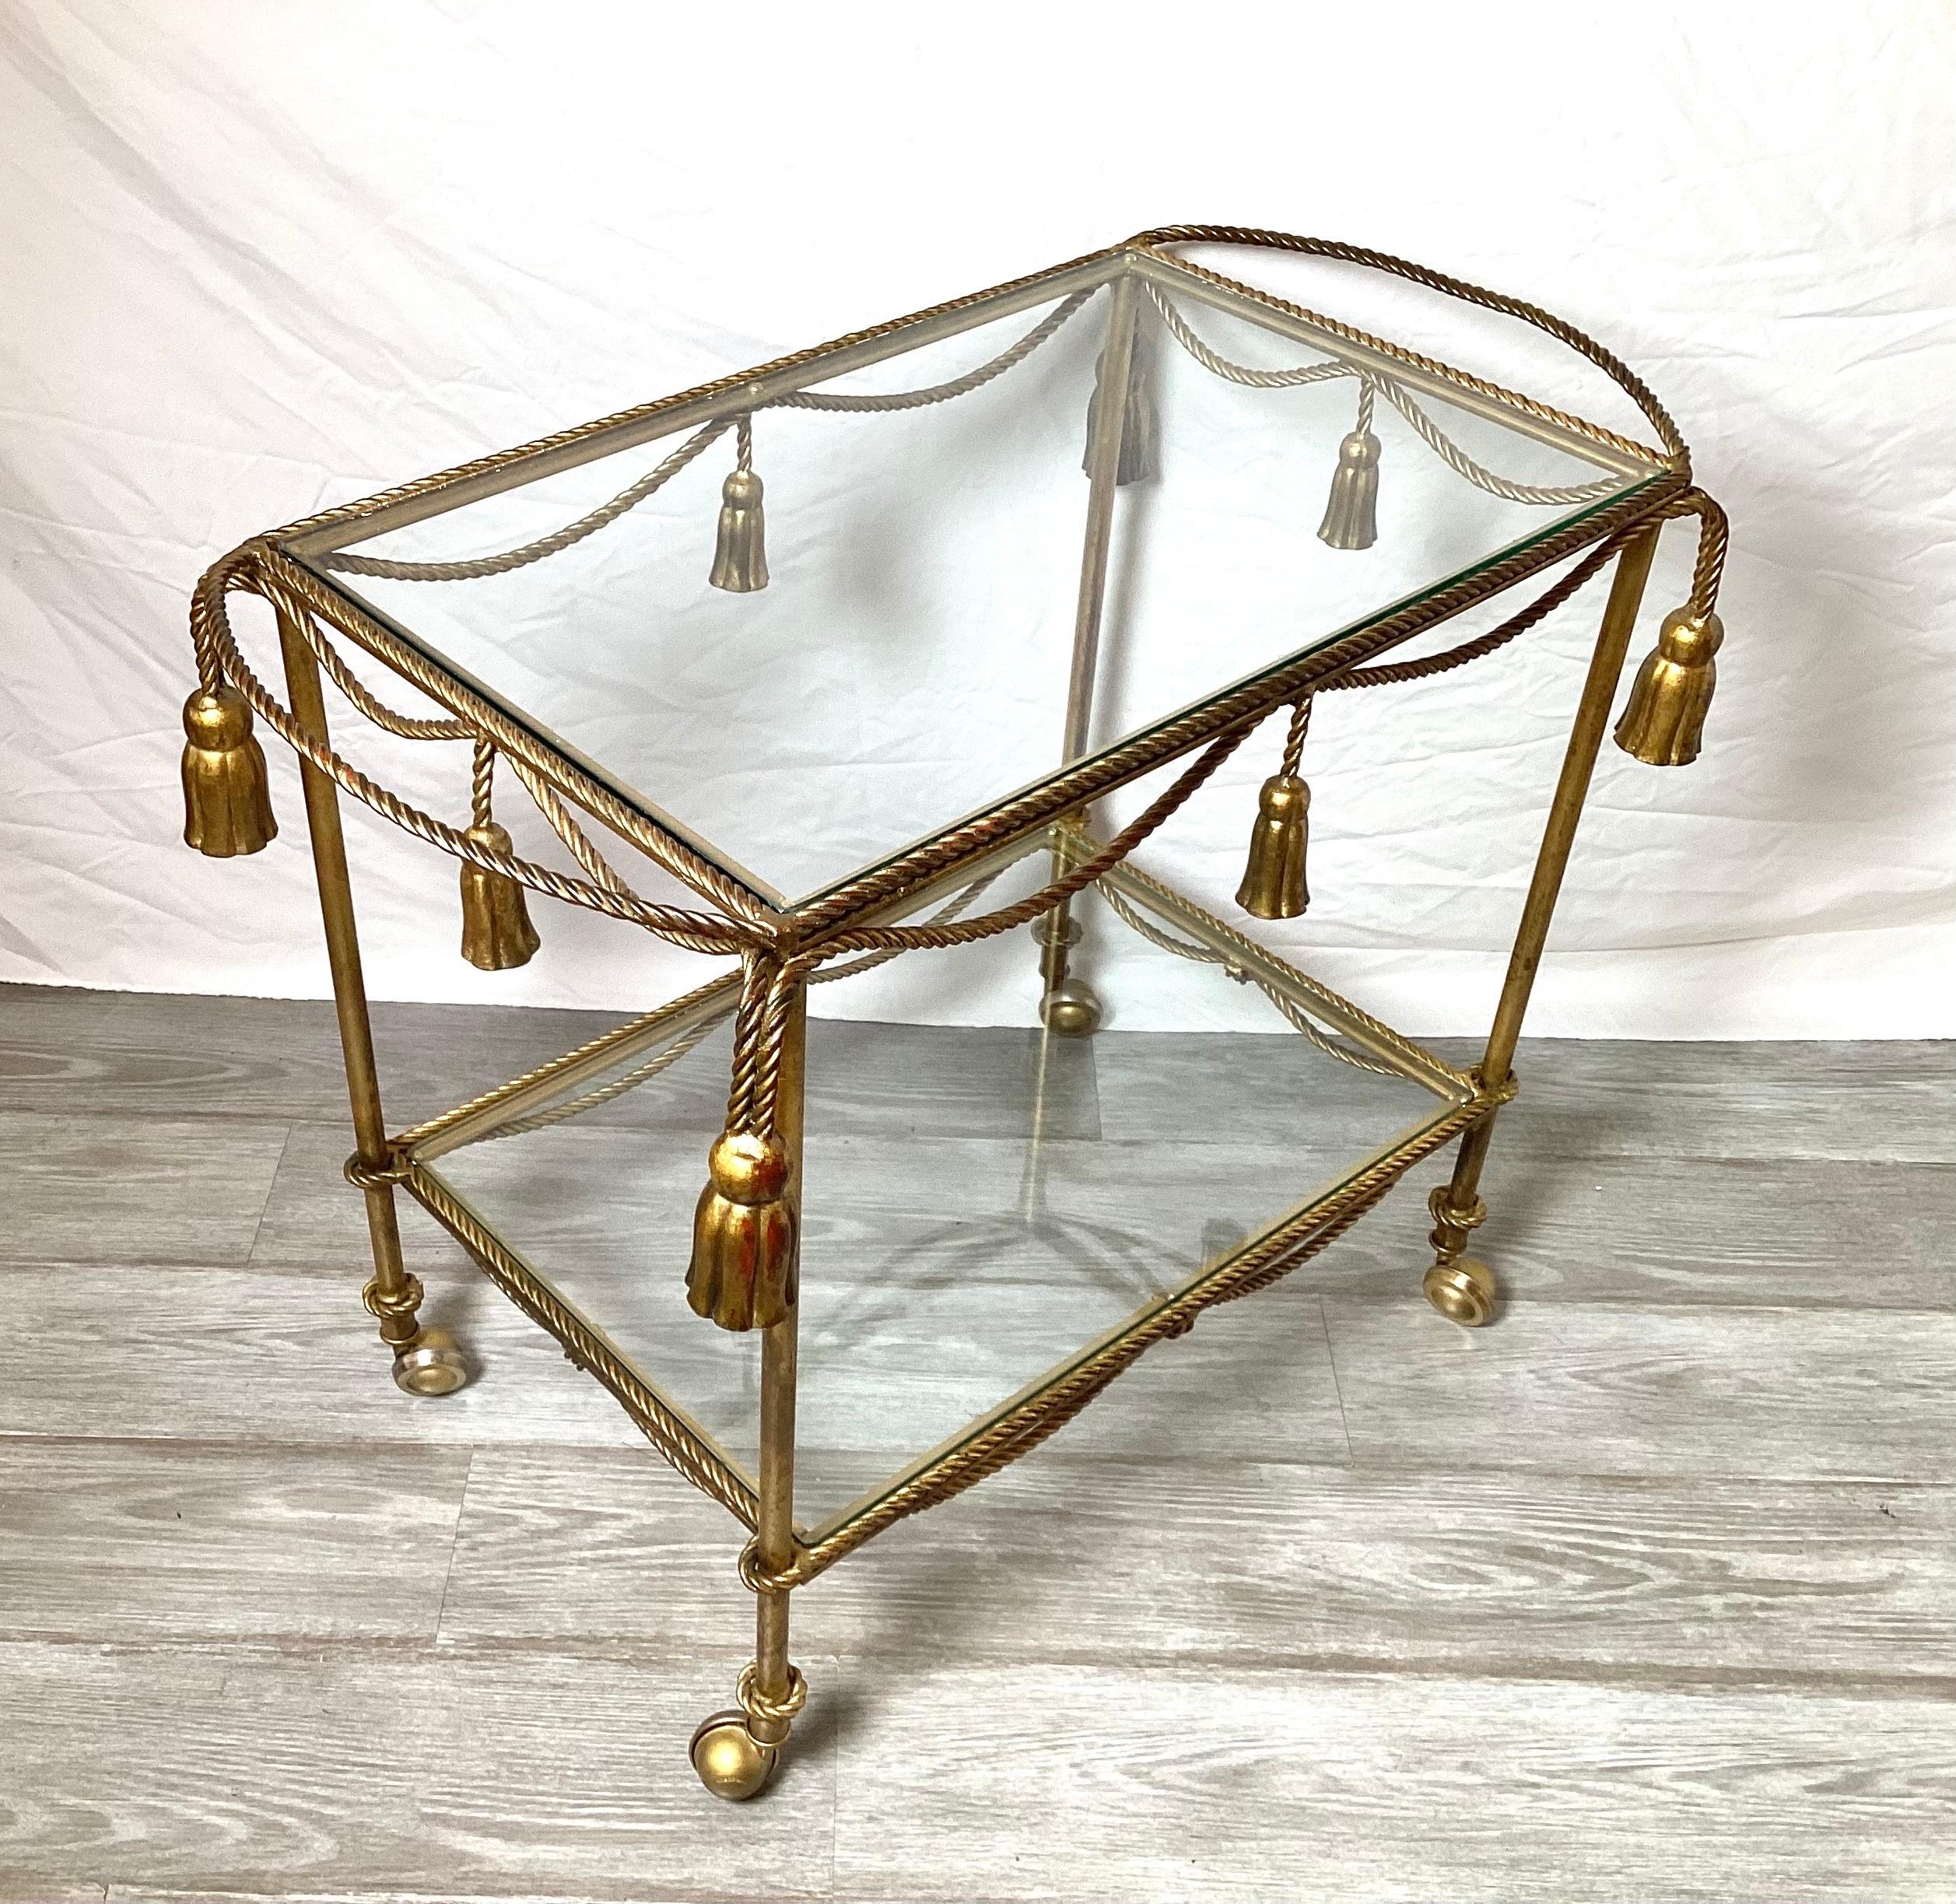 A charming gilt metal and glass tiered bar dessert or beverage cart. The rope style trim with tassels with two shelves resting of castors.